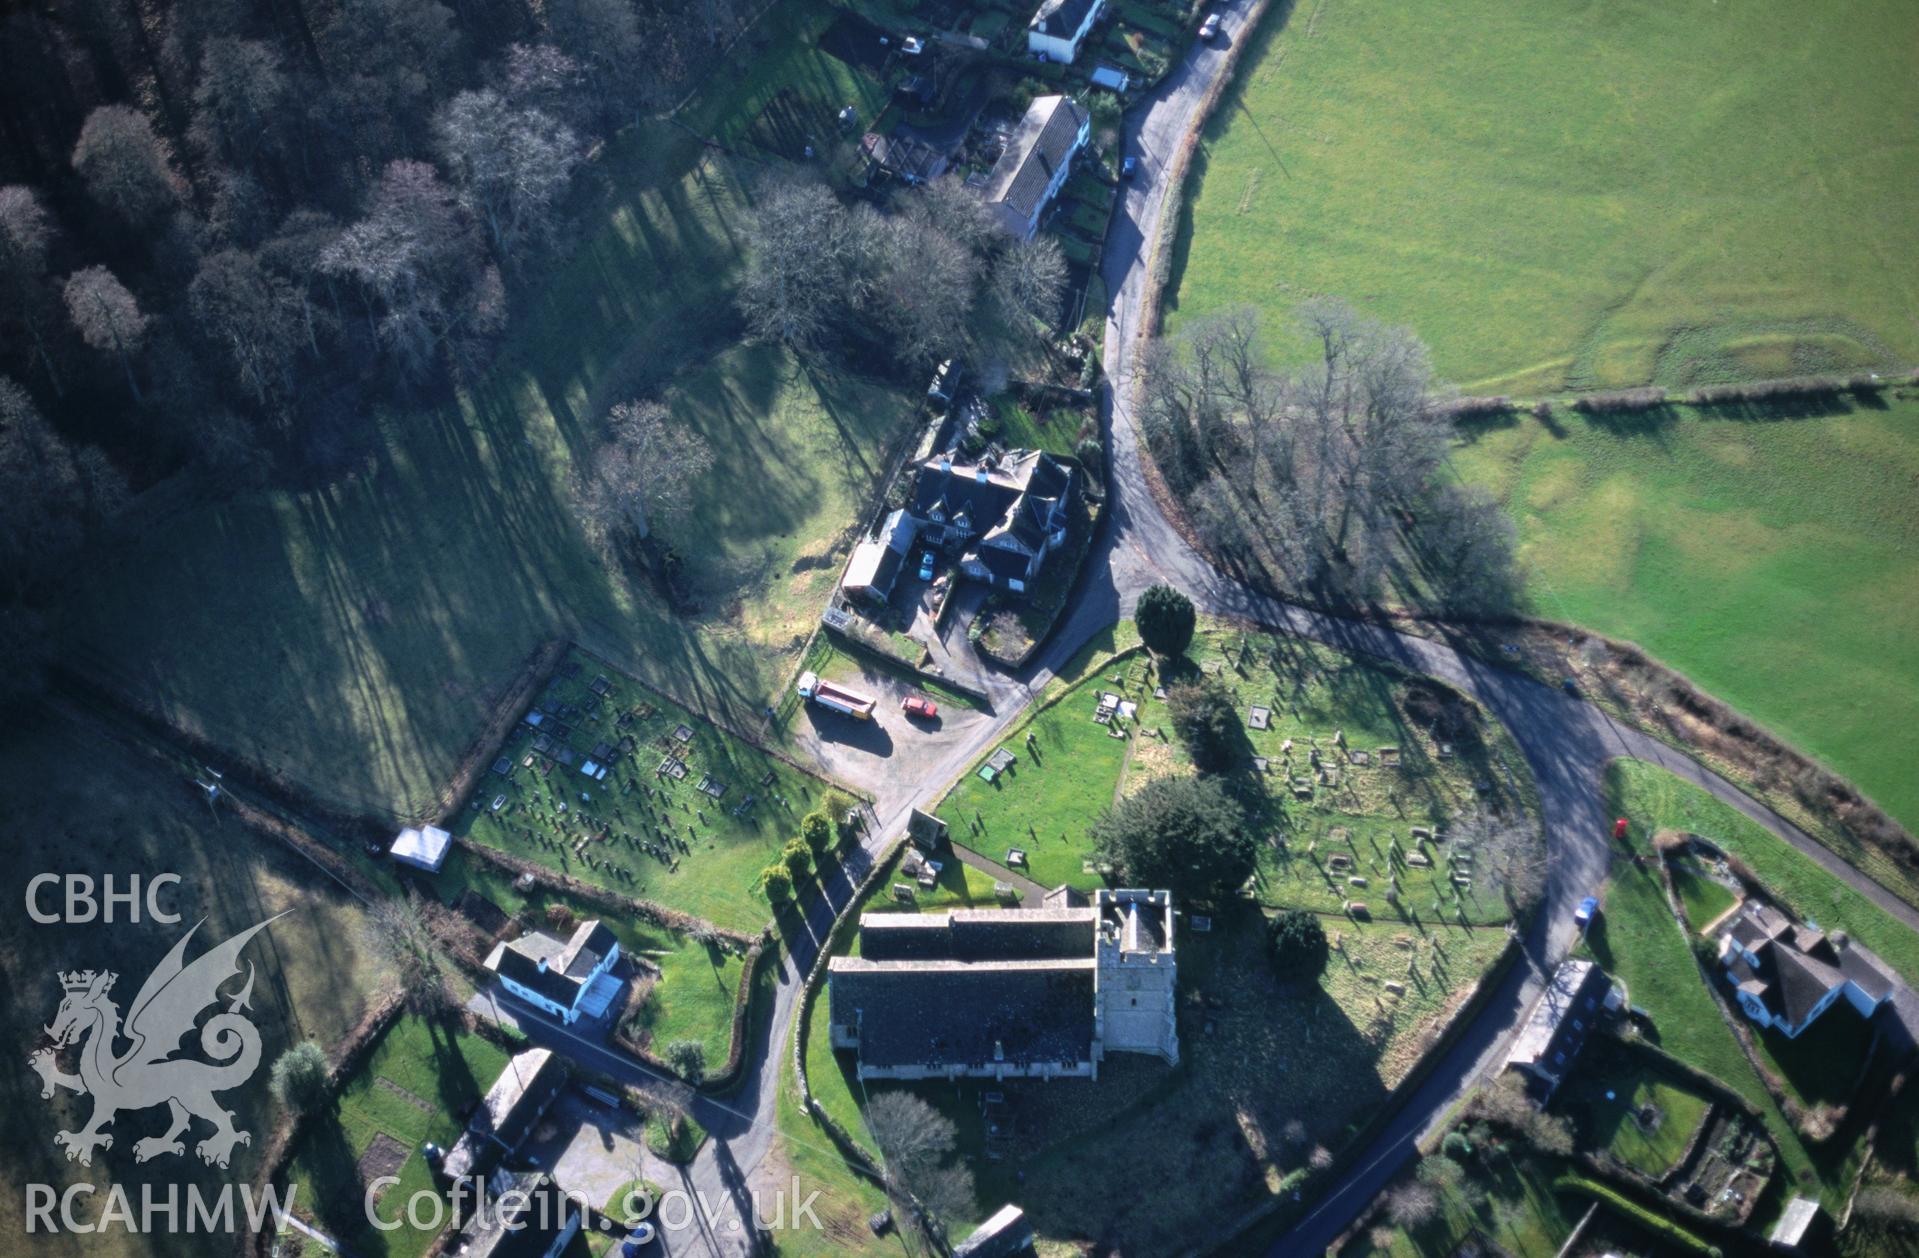 Slide of RCAHMW colour oblique aerial photograph of Old Radnor Castle;old Radnor, Enclosure, taken by T.G. Driver, 16/2/2001.